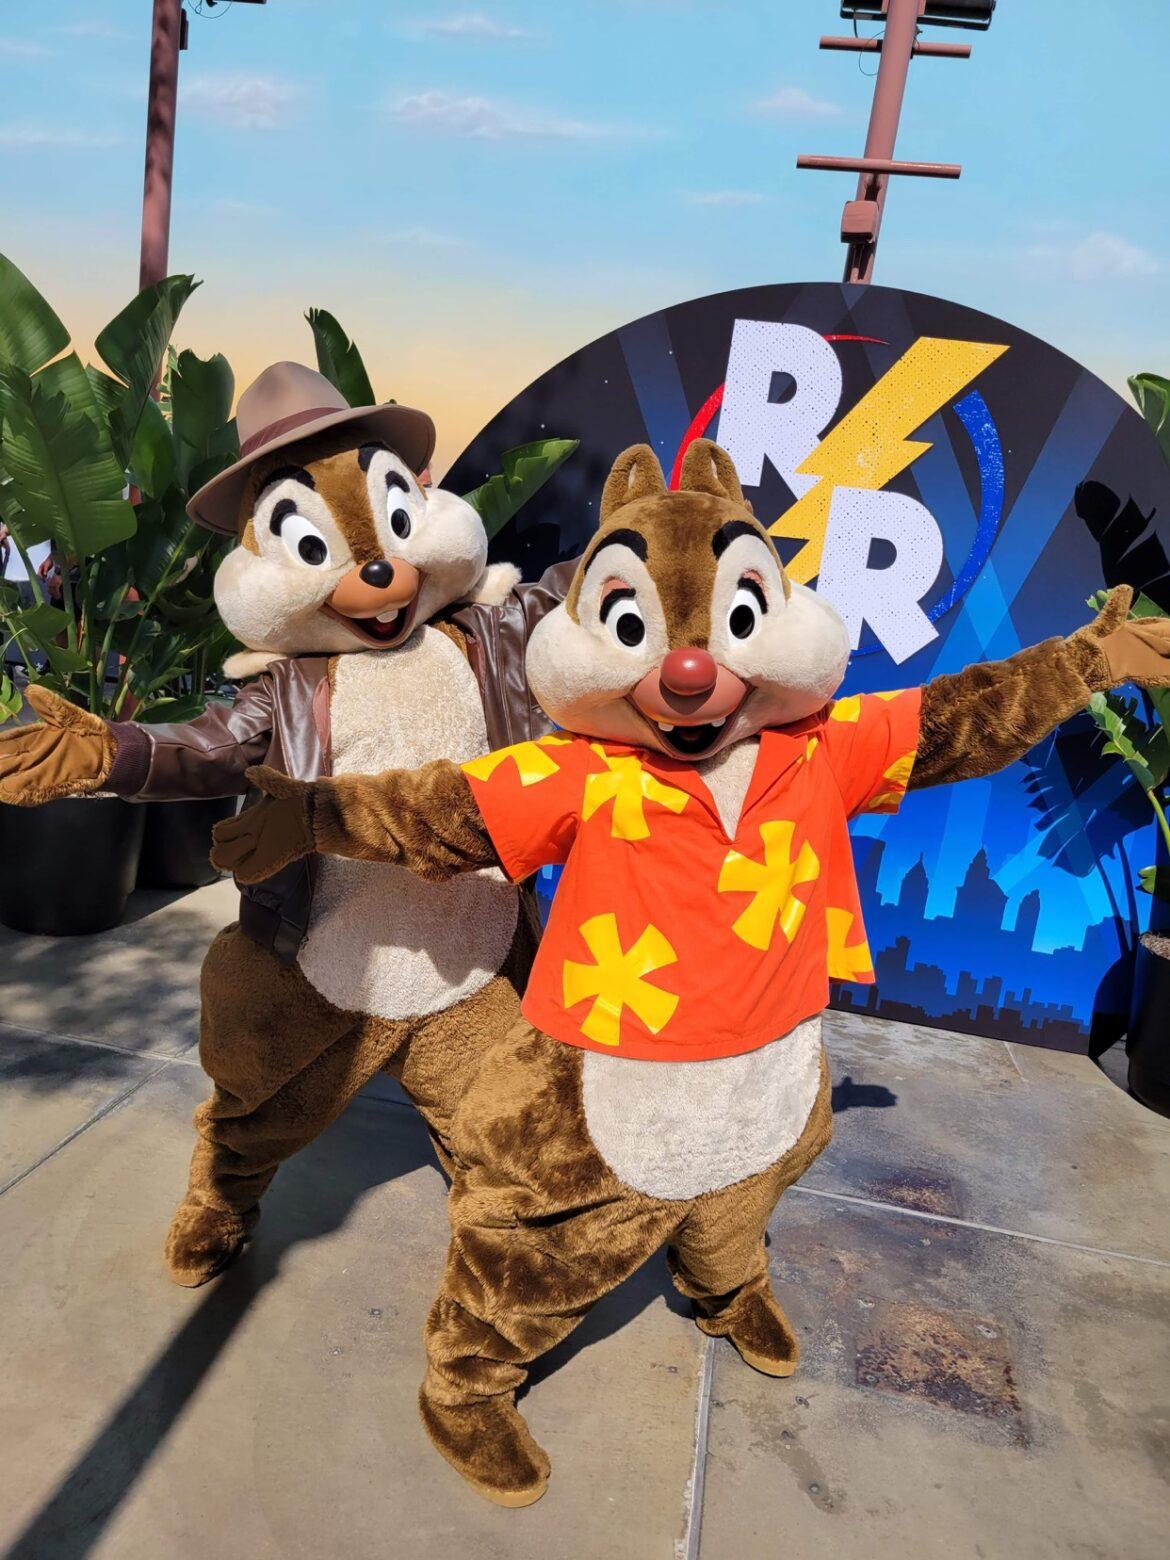 Chip ‘n Dale: Rescue Rangers Meet and Greet coming to Disney’s Hollywood Studios